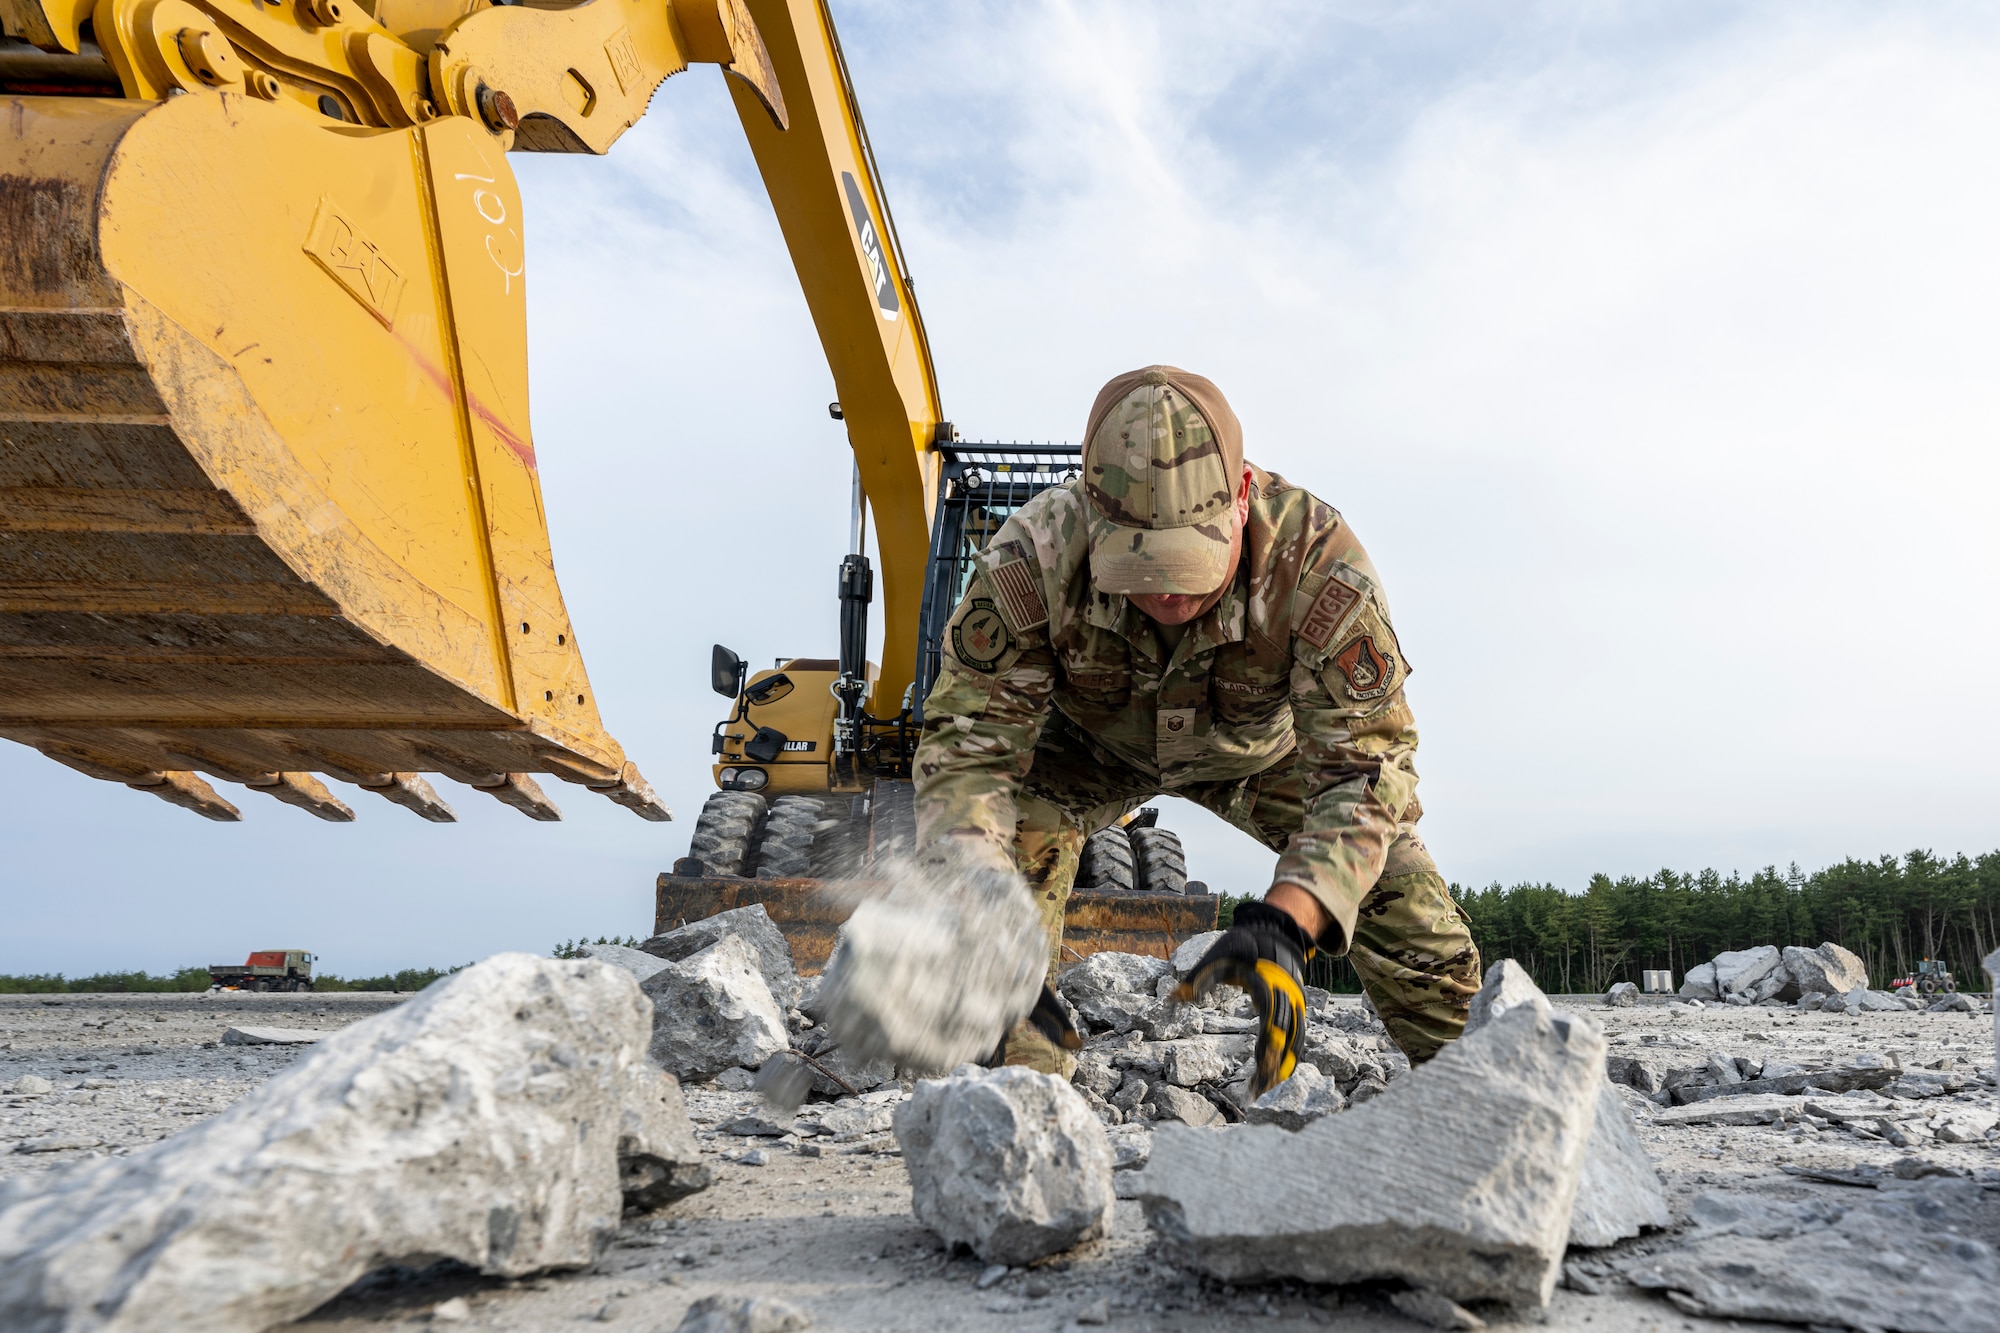 U.S. Air Force Airmen assigned to the 18th Civil Engineer Group remove concrete pieces inside a crater during a bilateral live fire exercise.